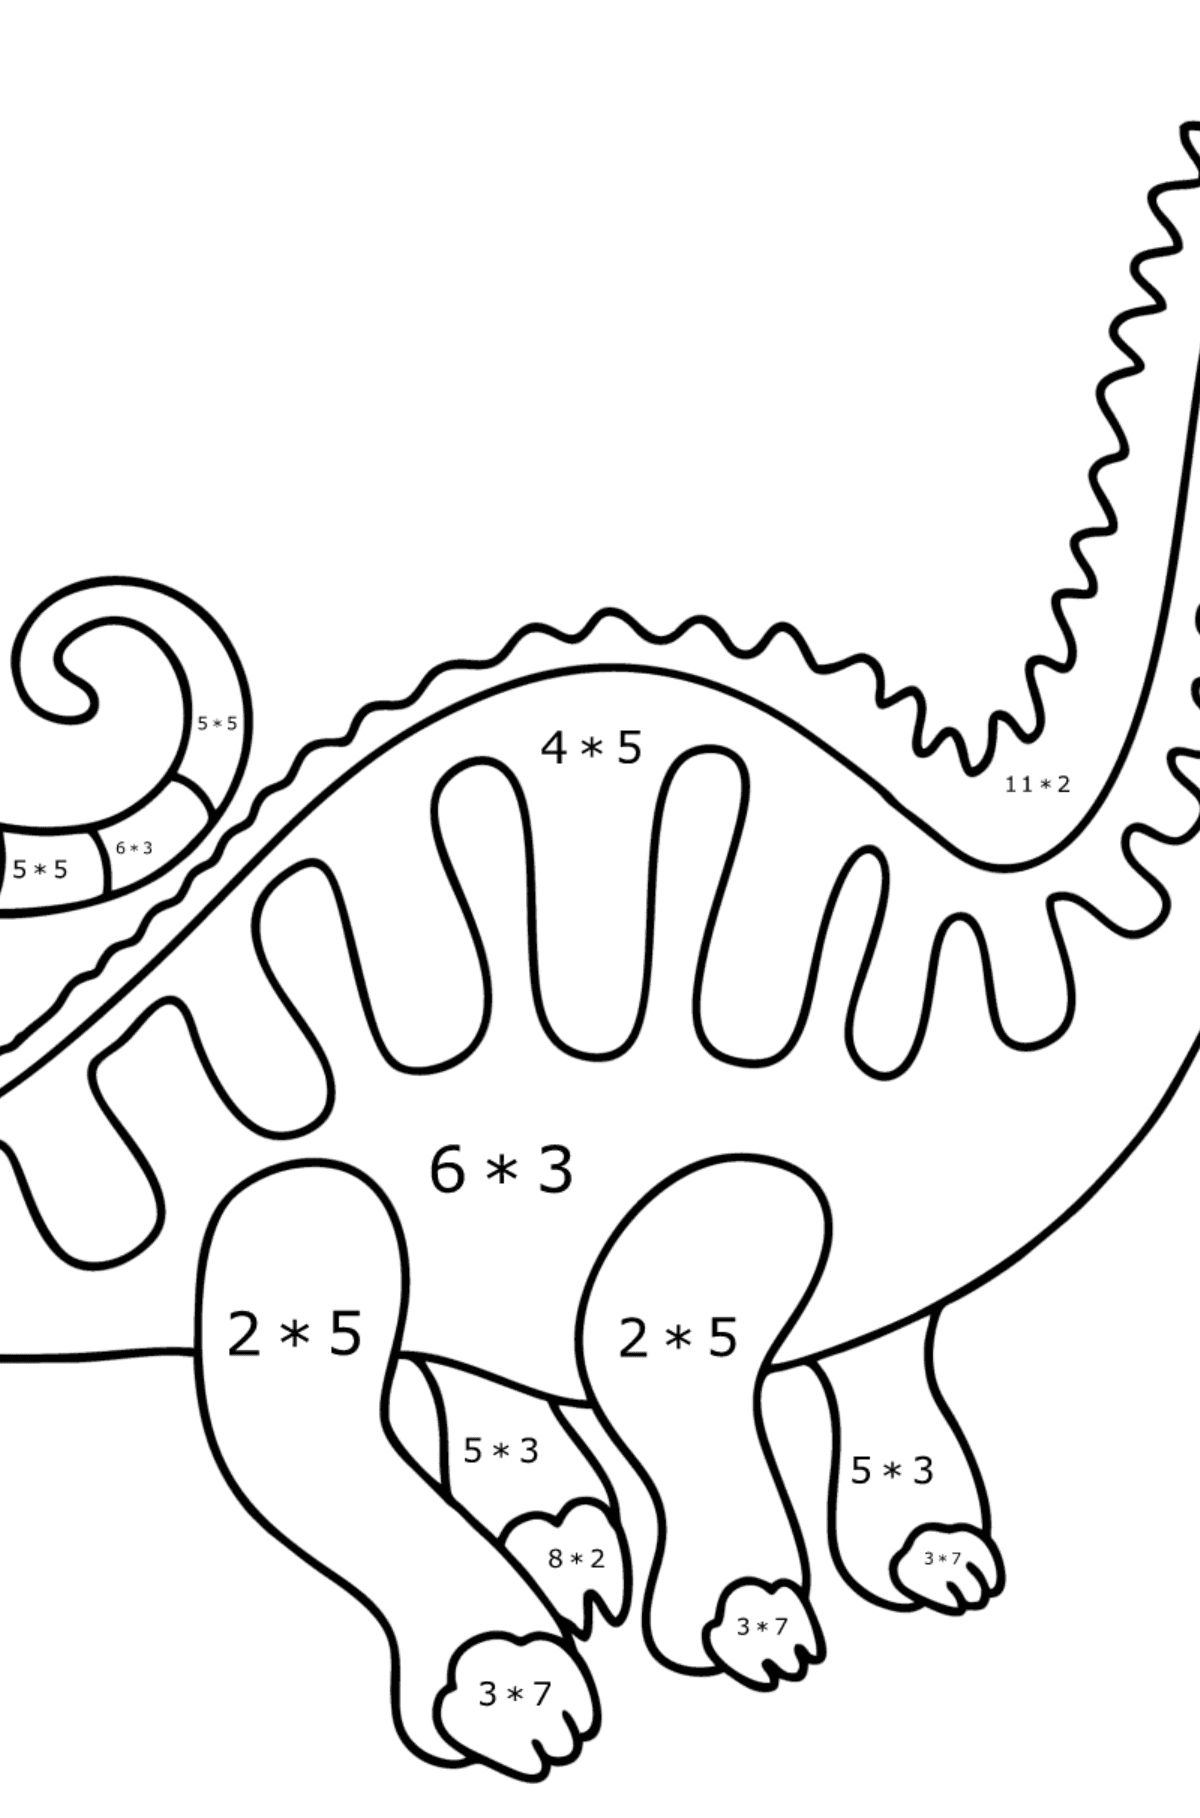 Apatosaurus coloring page - Math Coloring - Multiplication for Kids